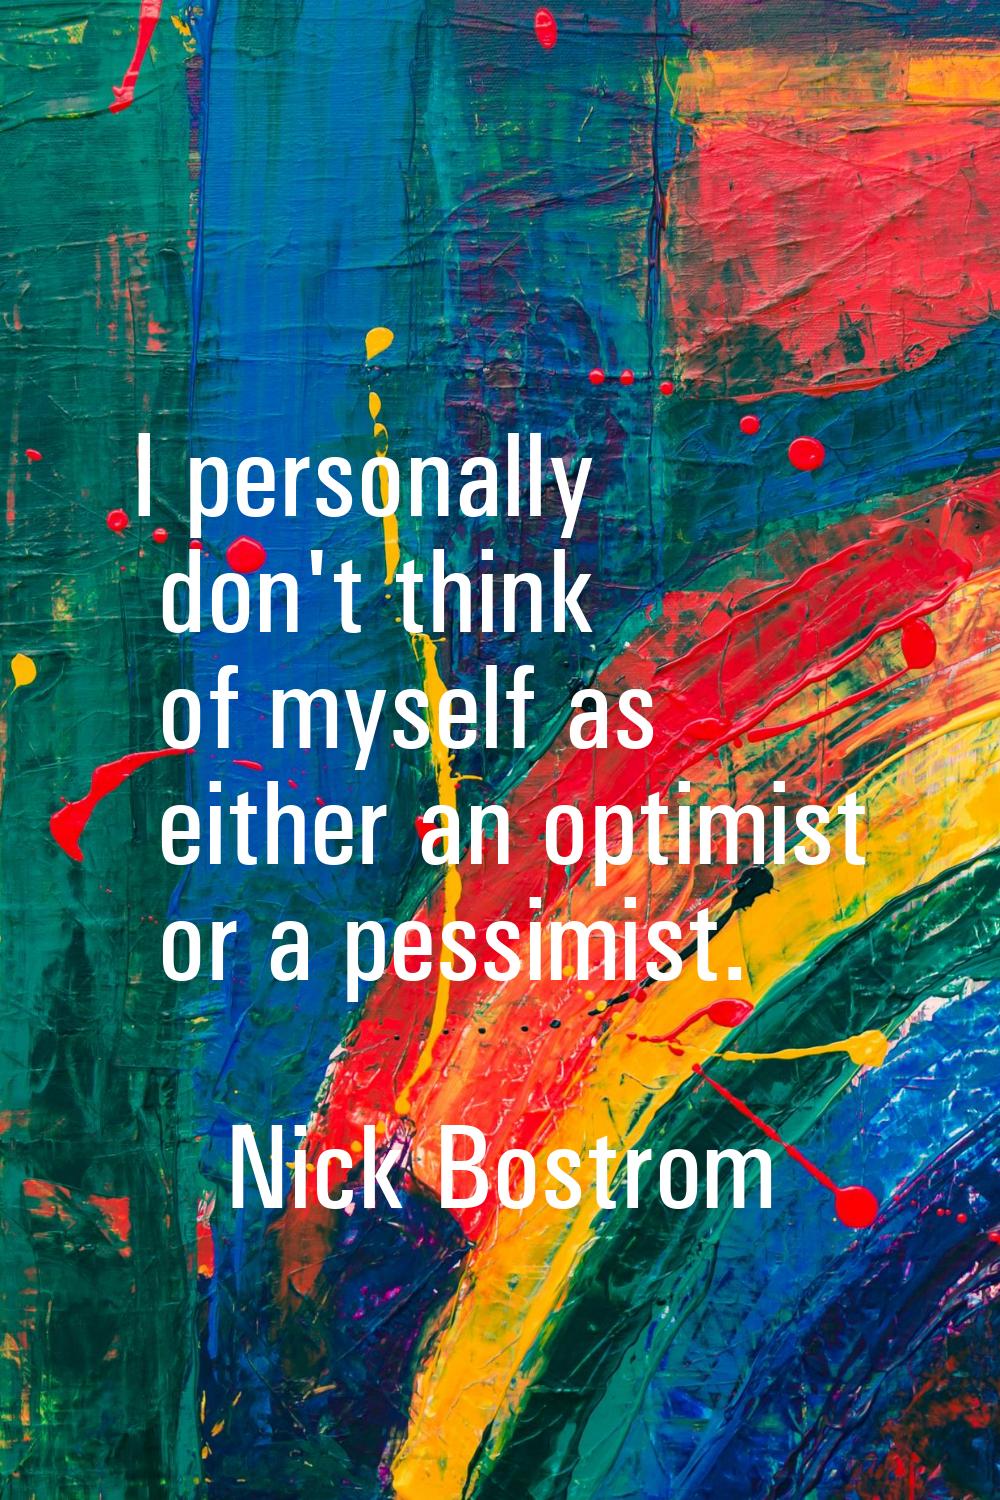 I personally don't think of myself as either an optimist or a pessimist.